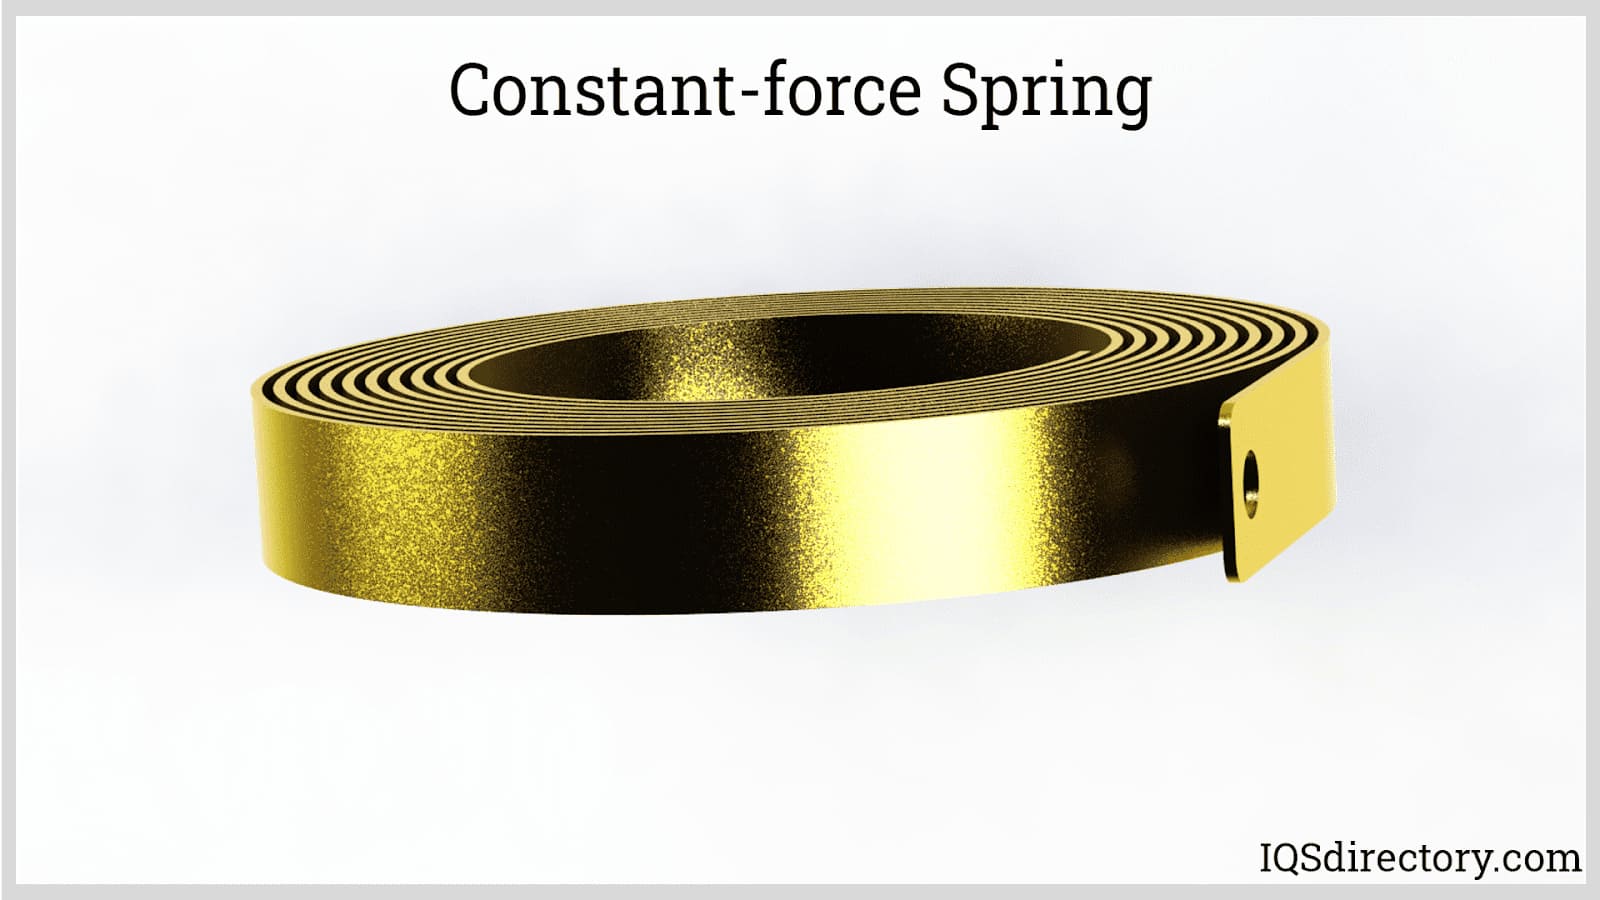 Constant-force Spring